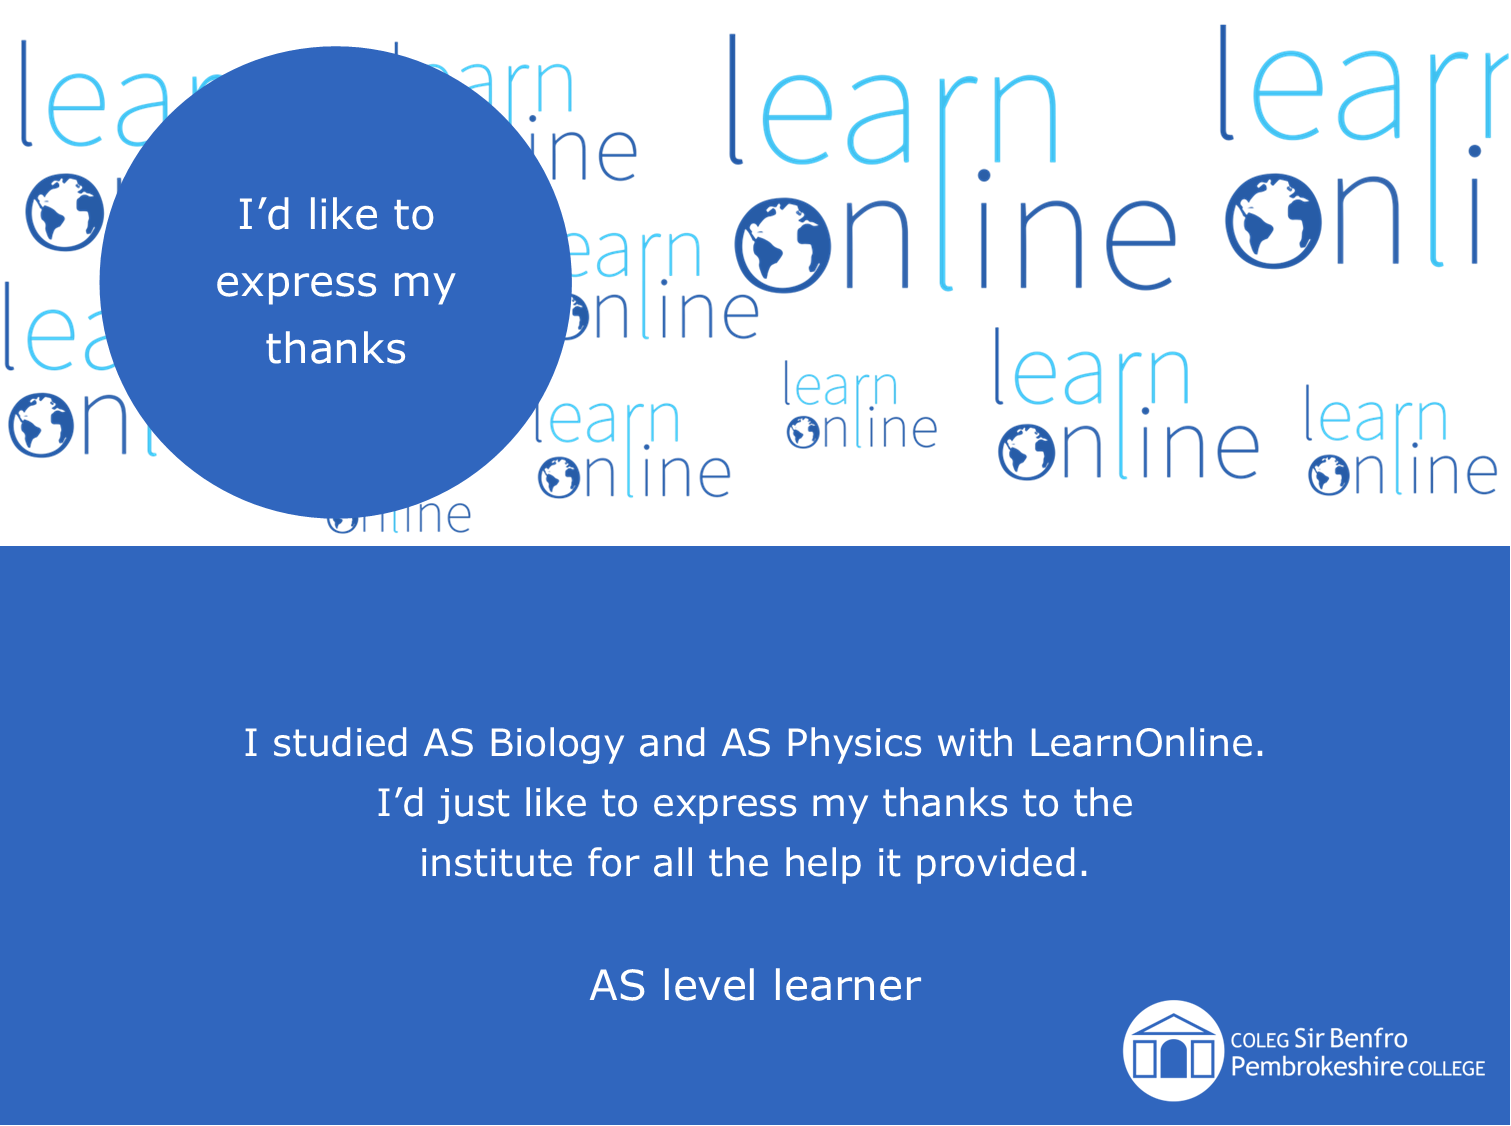 LearnOnline testimonial 'I’d like to express my thanks' I studied AS Biology and AS Physics with LearnOnline. I’d just like to express my thanks to the institute for all the help it provided. AS level learner